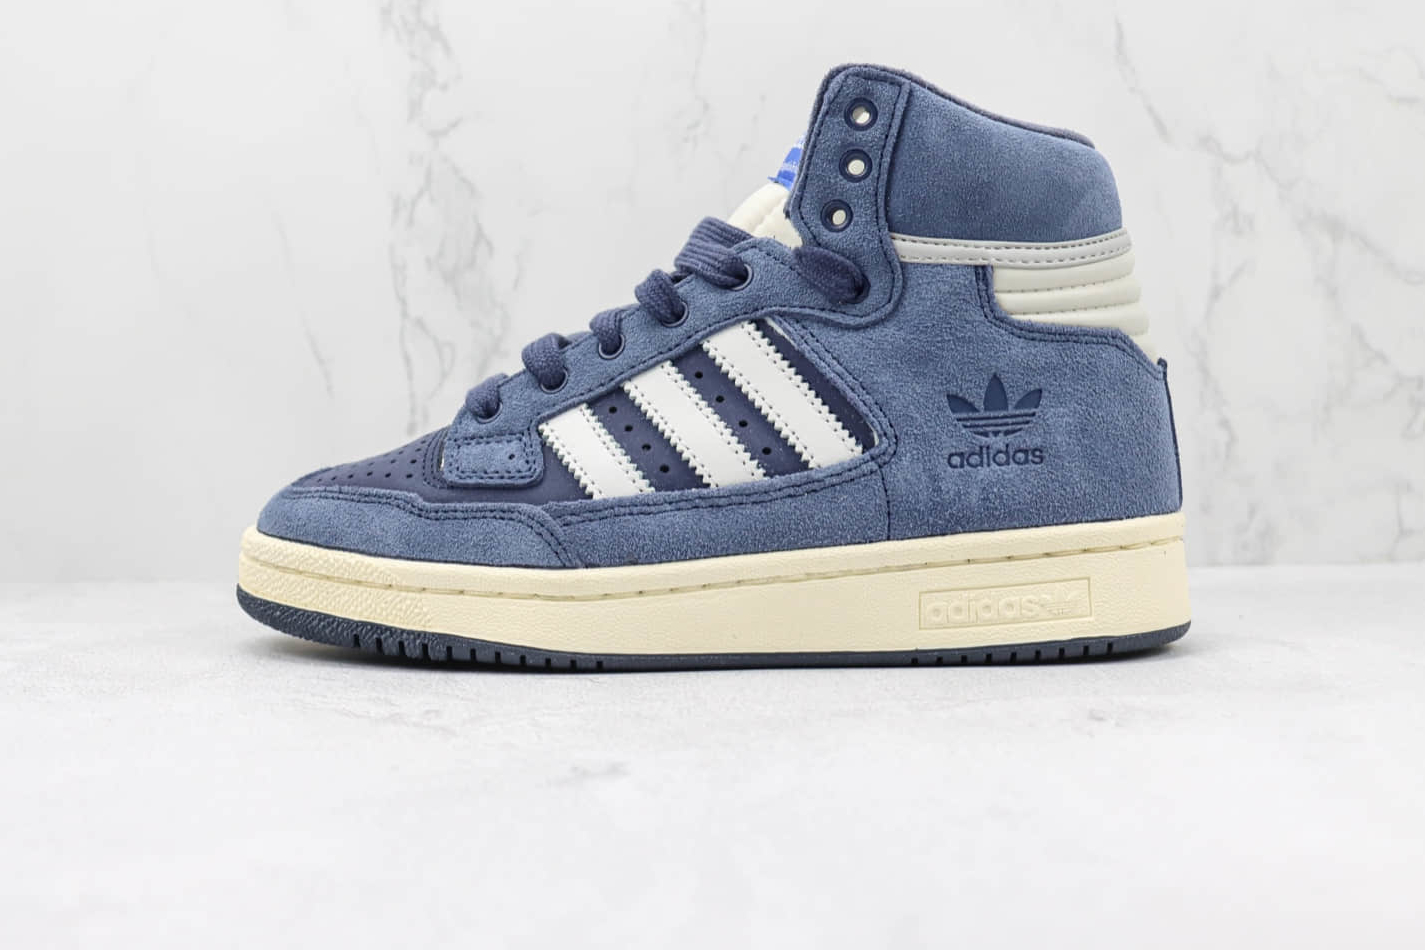 Adidas Centennial 85 High 'Shadow Navy' FZ5992 | Limited Edition Sneakers